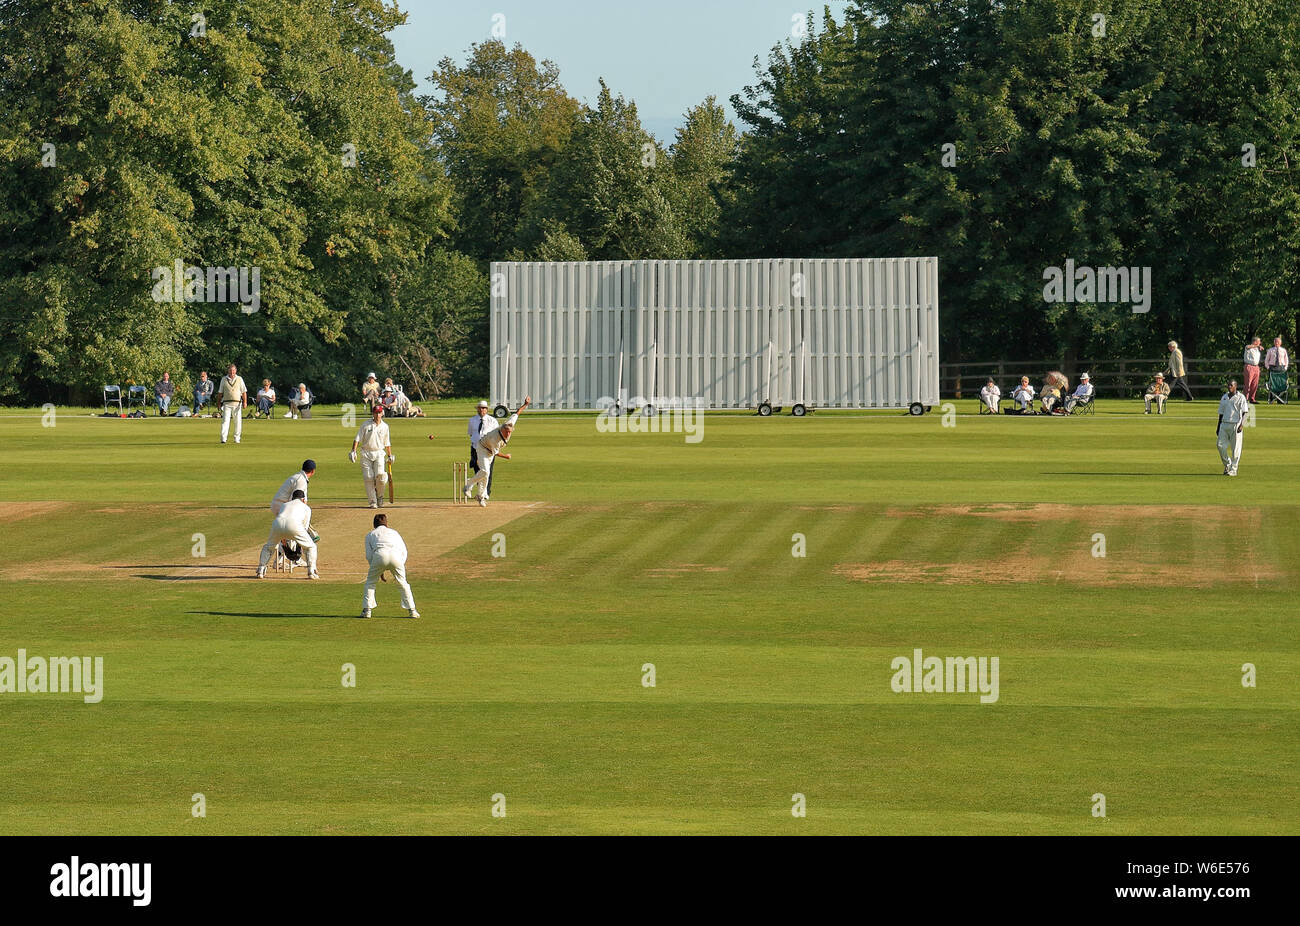 Batsman and Fielders in action at an English Cricket match at Arundel Castle Cricket Club Stock Photo